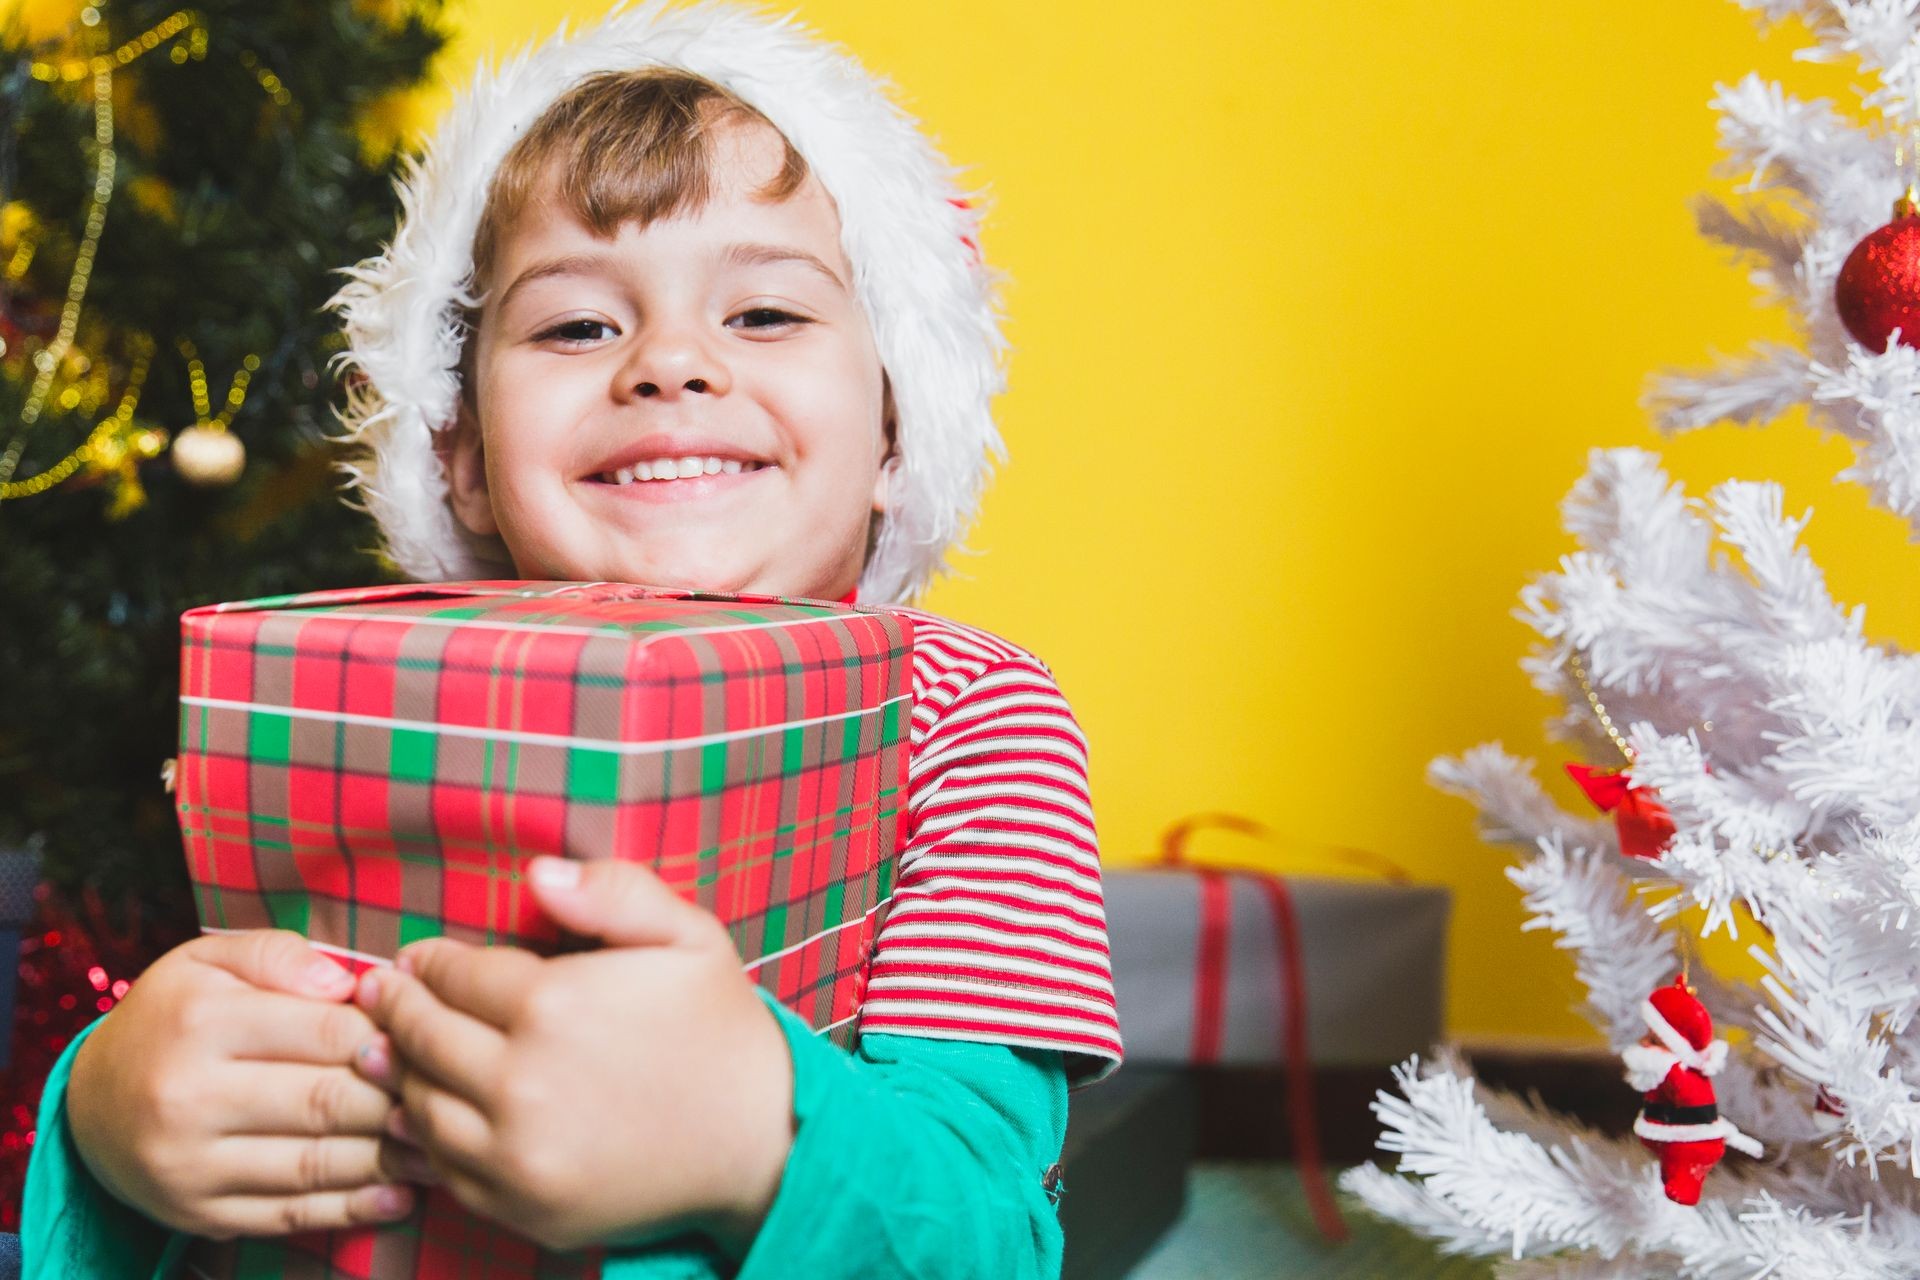 A young boy holding customized gift celebrating Christmas day near a Christmas tree